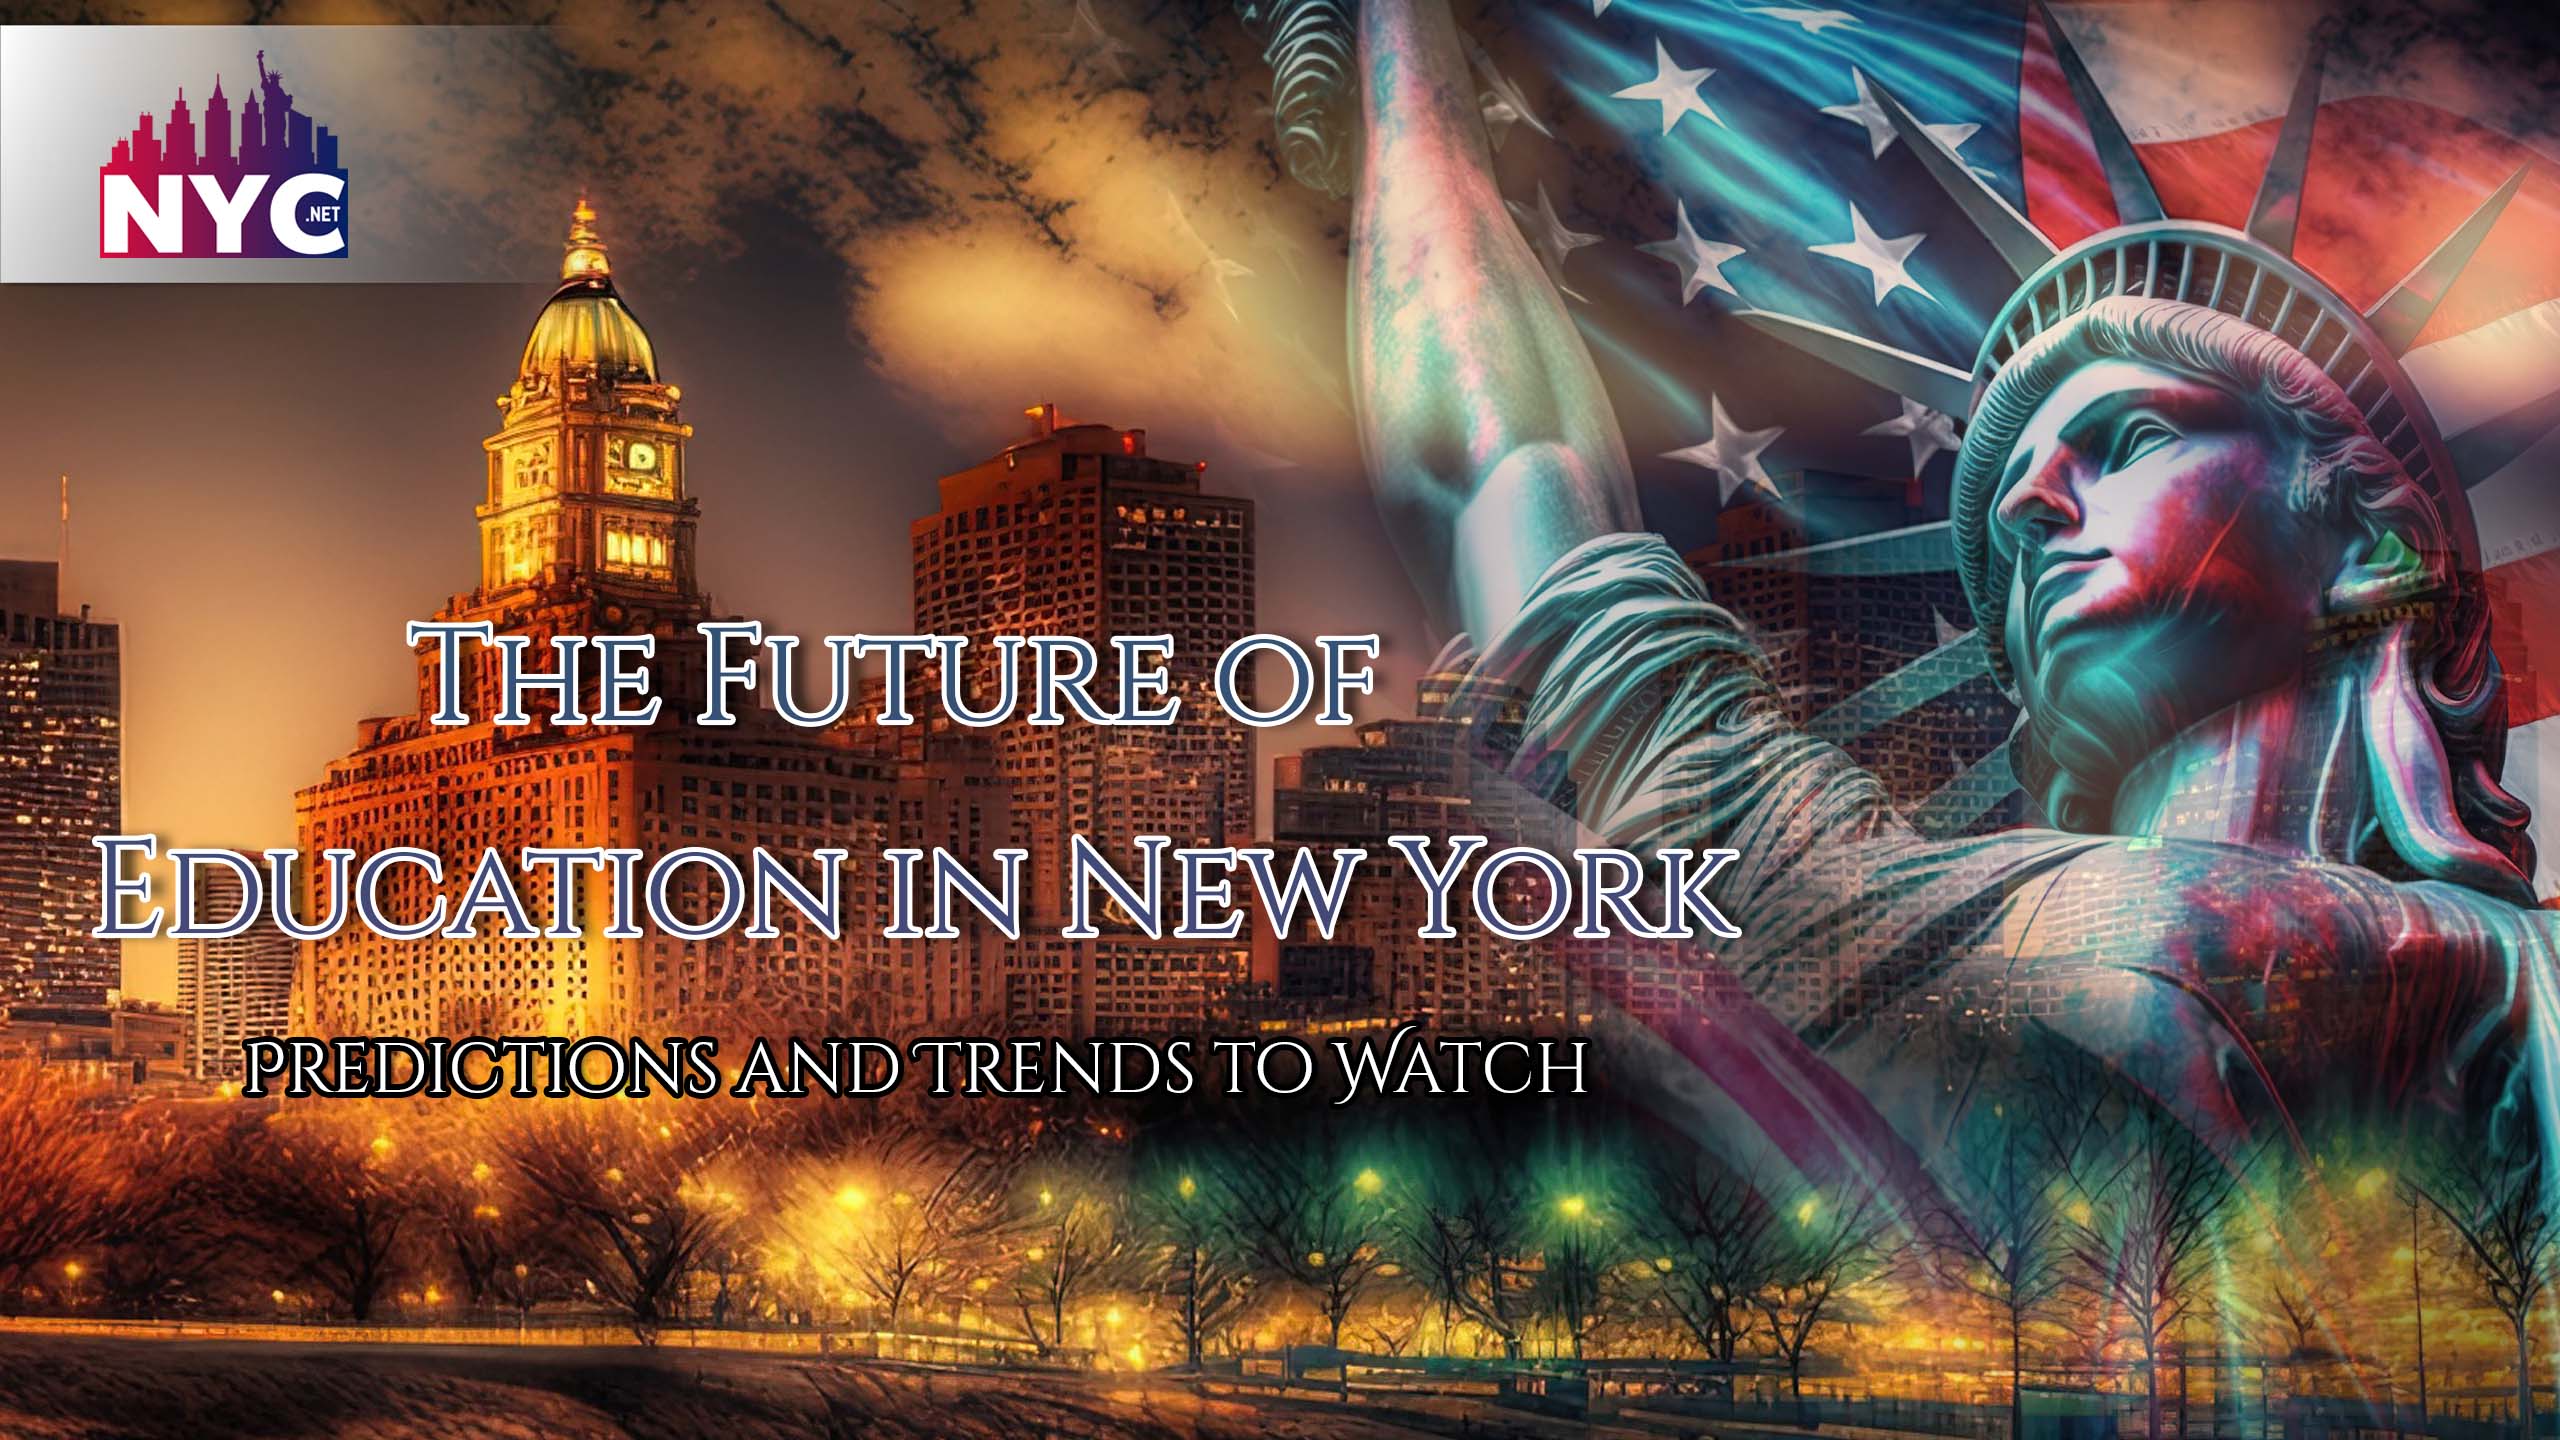 The Future of Education in New York: Predictions and Trends to Watch